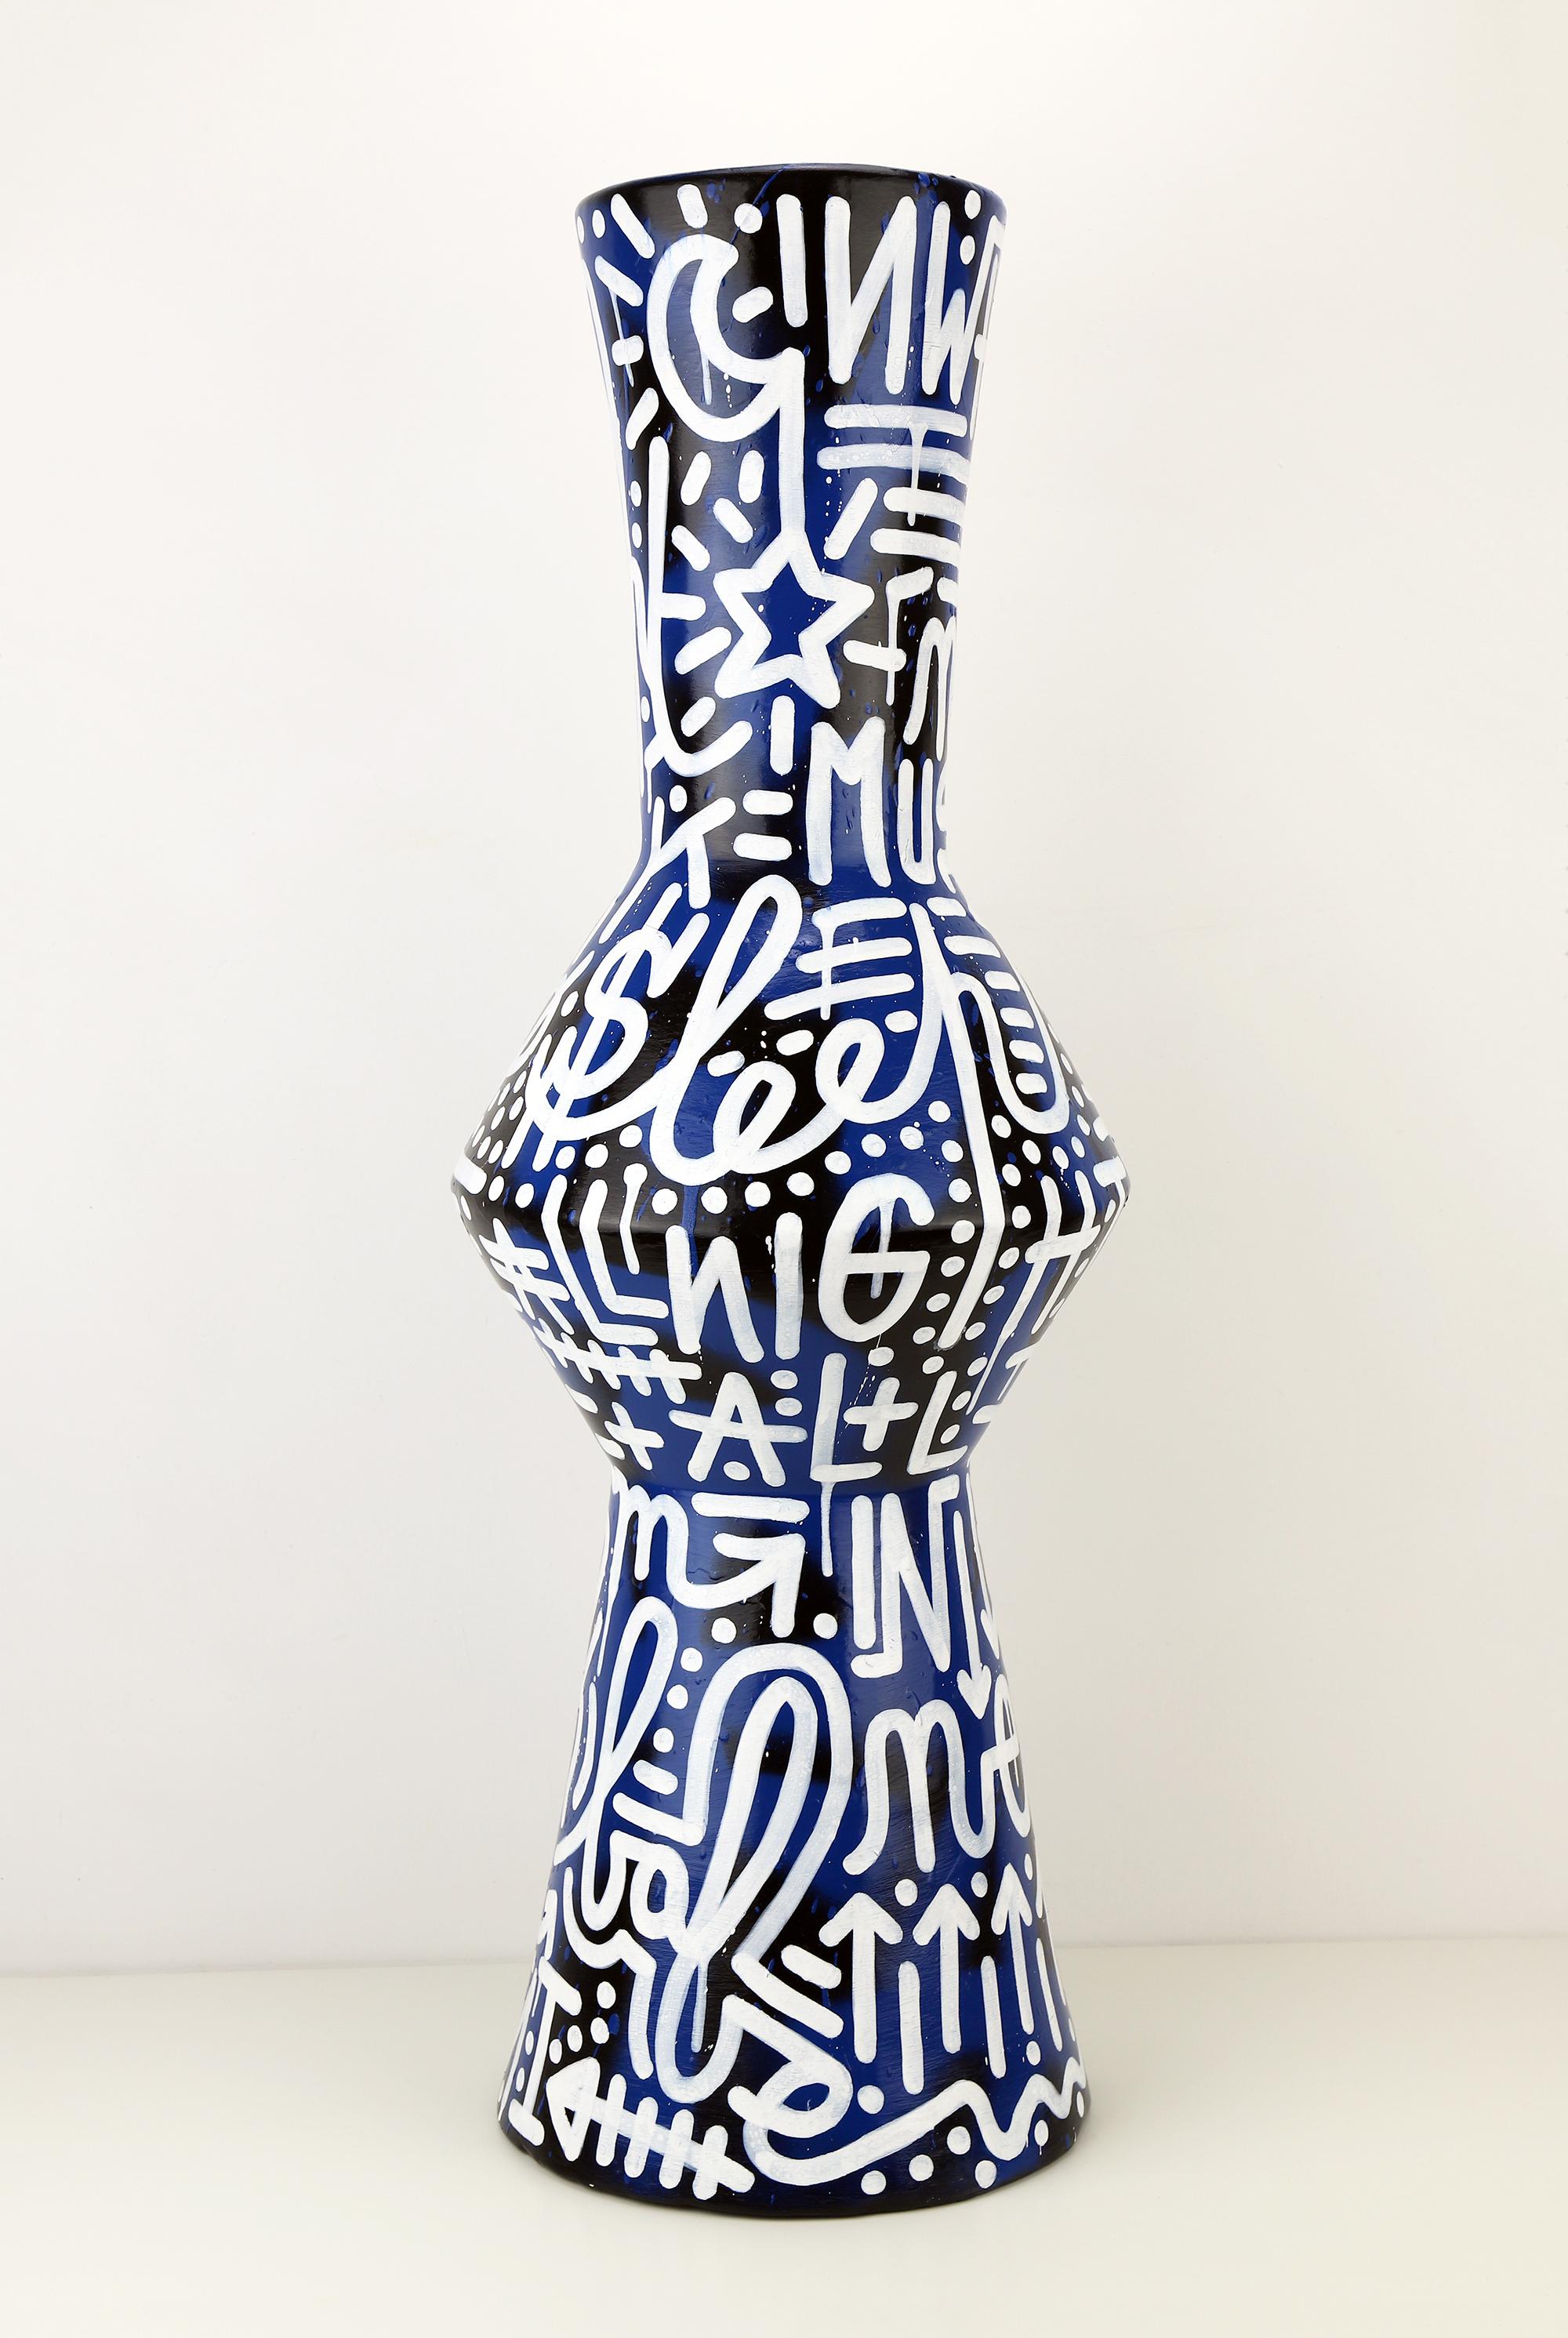 Grégoire Devin Abstract Sculpture - 'Sleepless Night in New York' Acrylic and Spray Painted Ceramic Vase